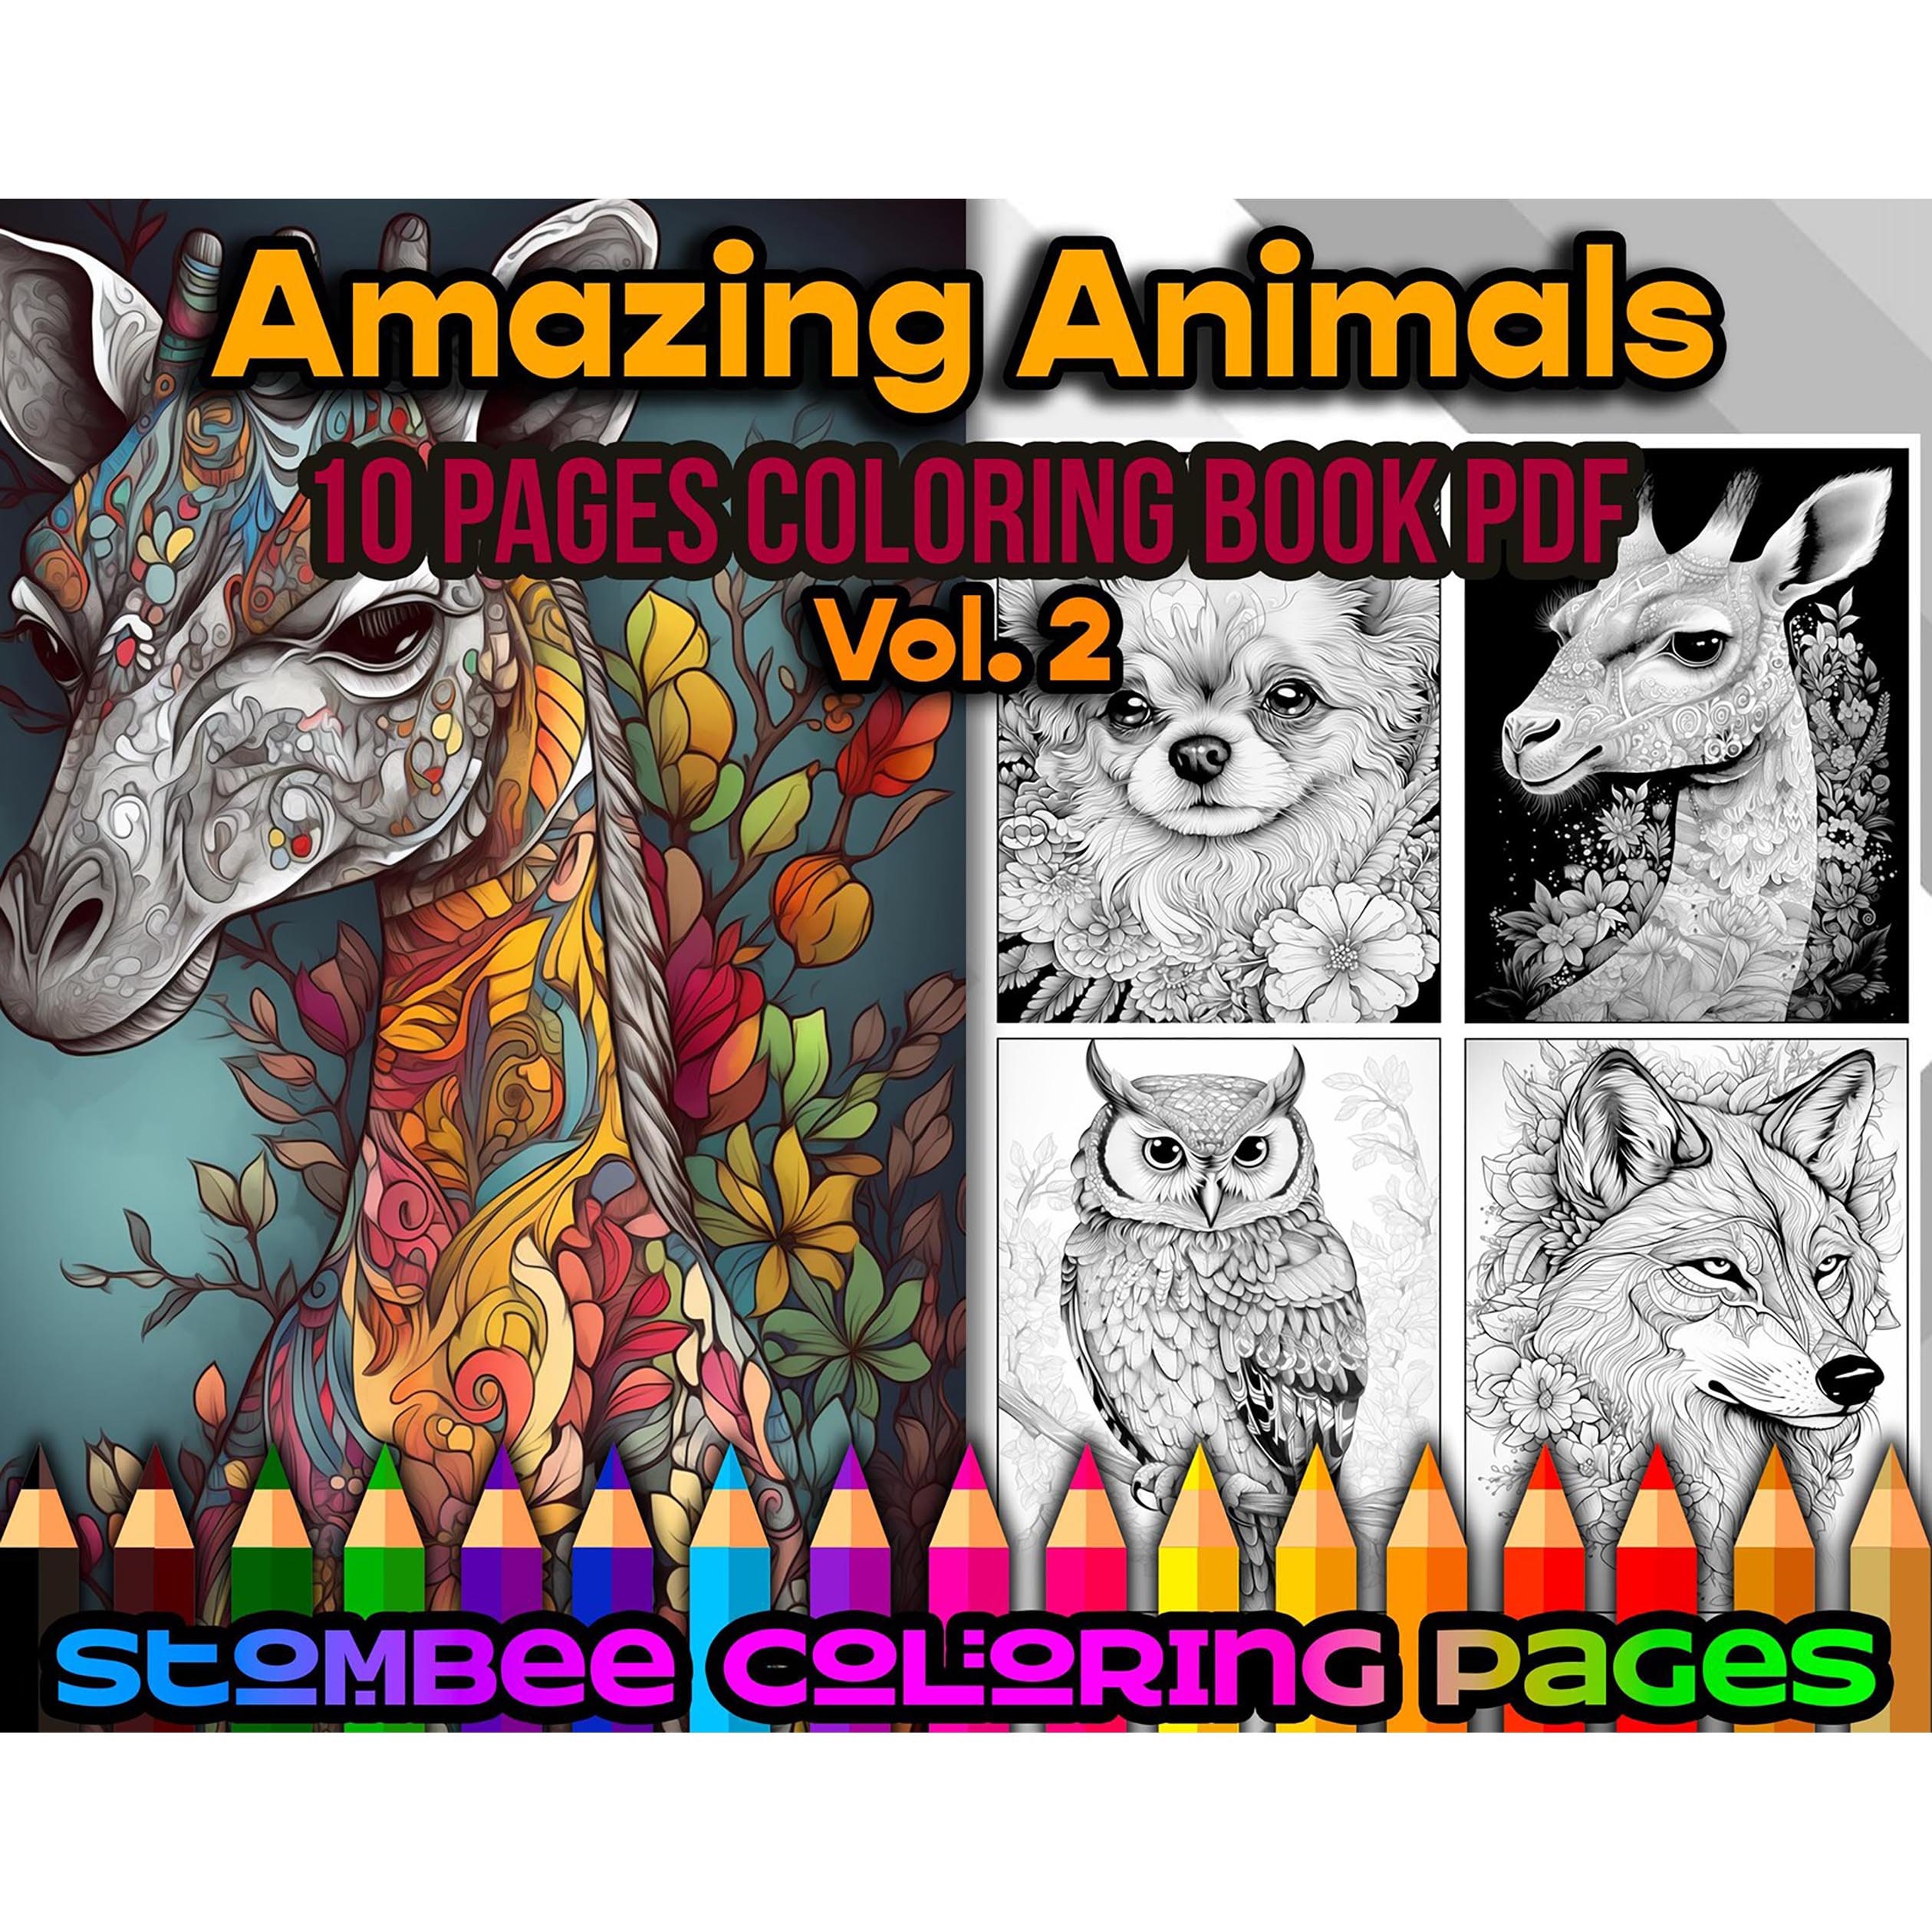 Whimsical Animals Adult Coloring Book for Mindfulness, Stress